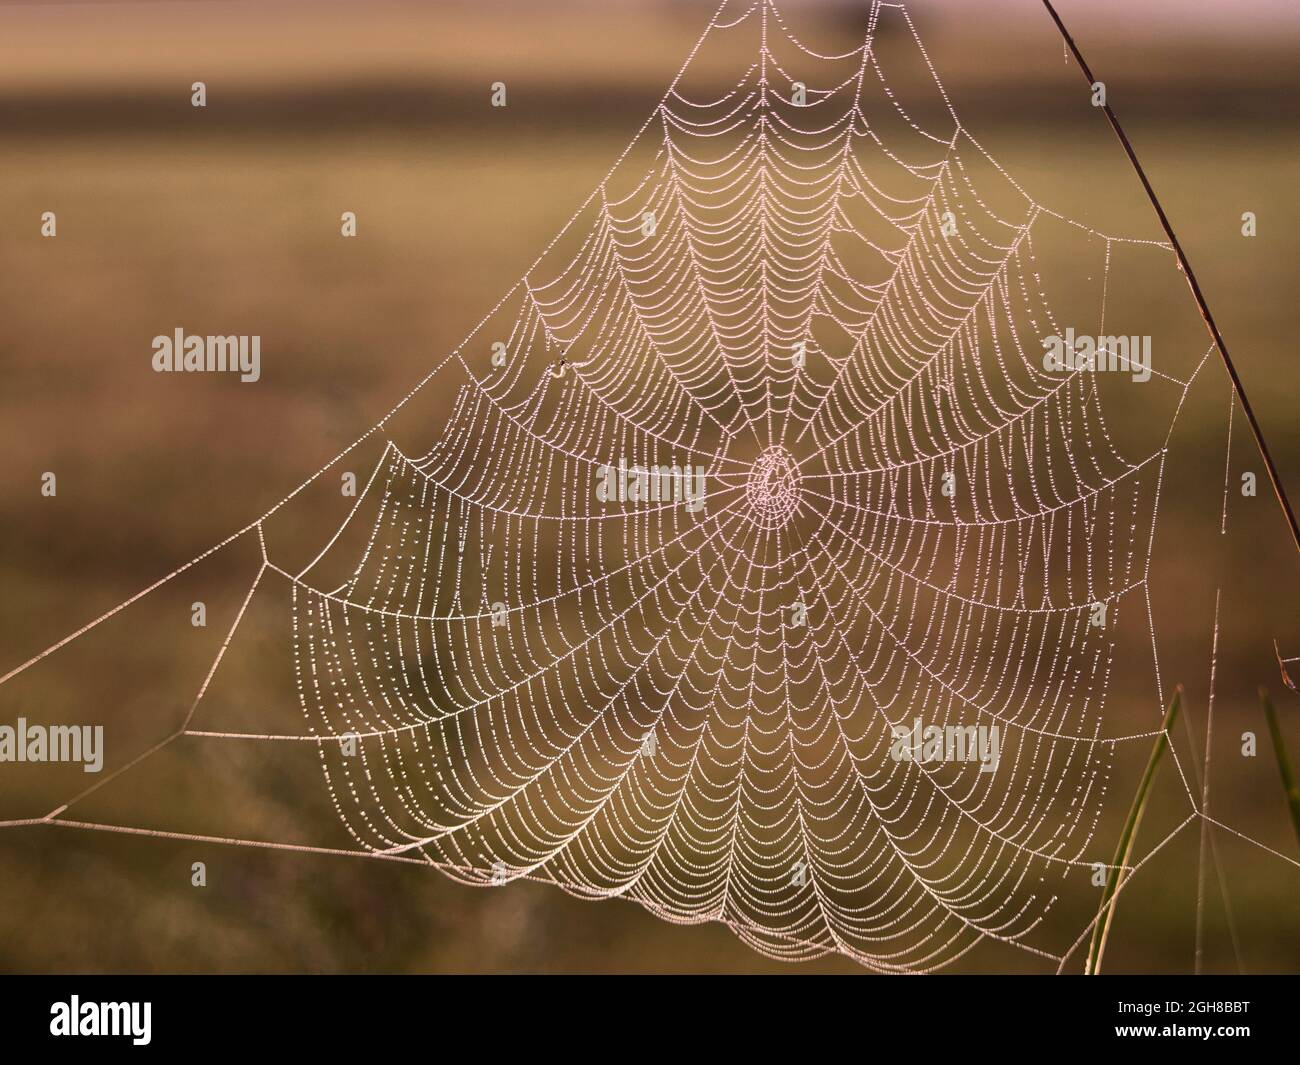 Close up of a spiders web in a field, suspended between tall grasses. Dew drops glisten in the morning sun. Stock Photo